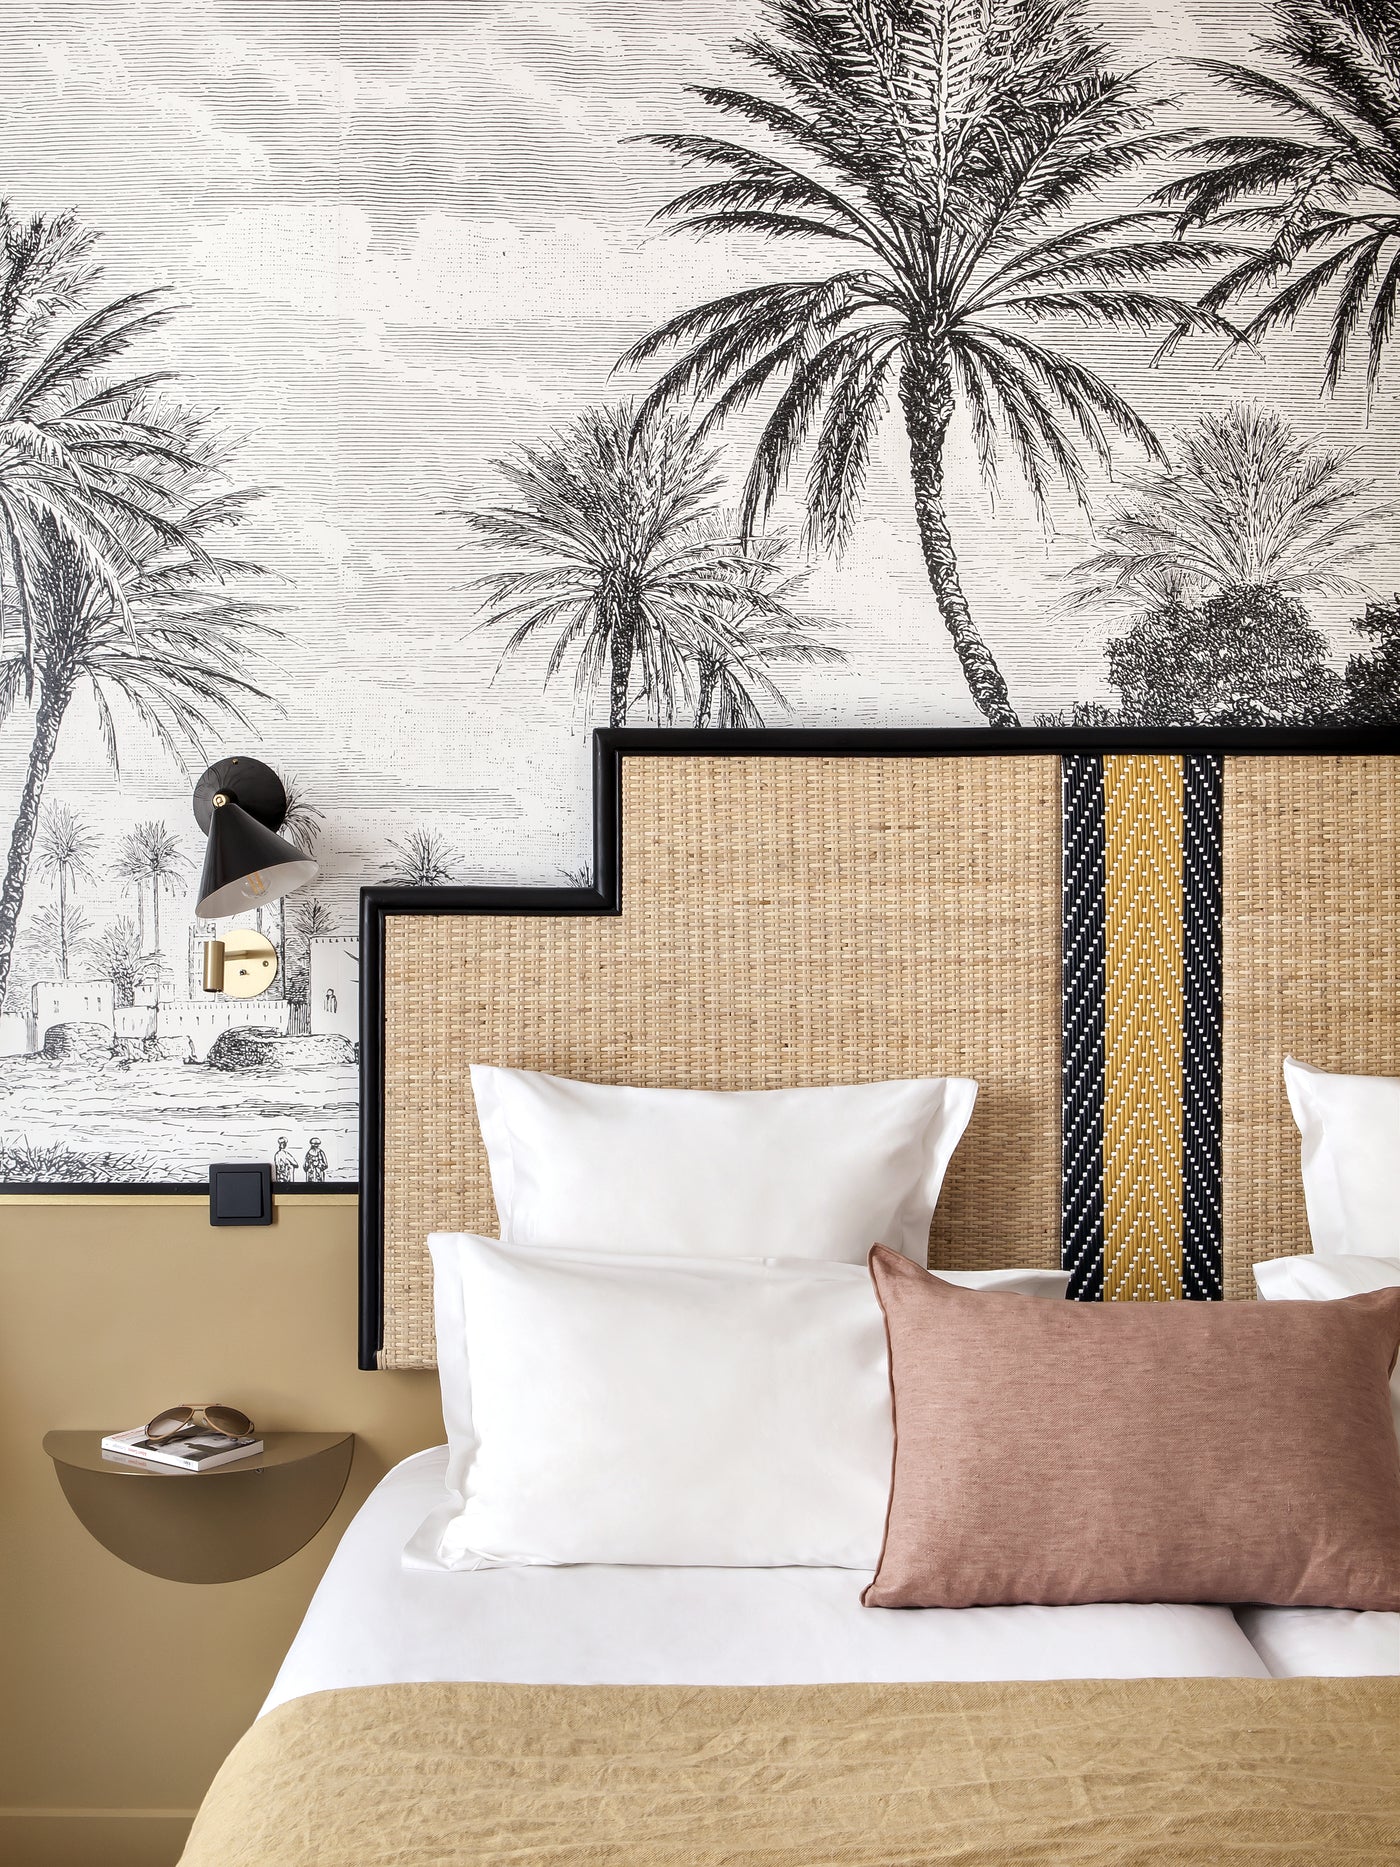 Six brilliant lighting ideas to steal from hotels